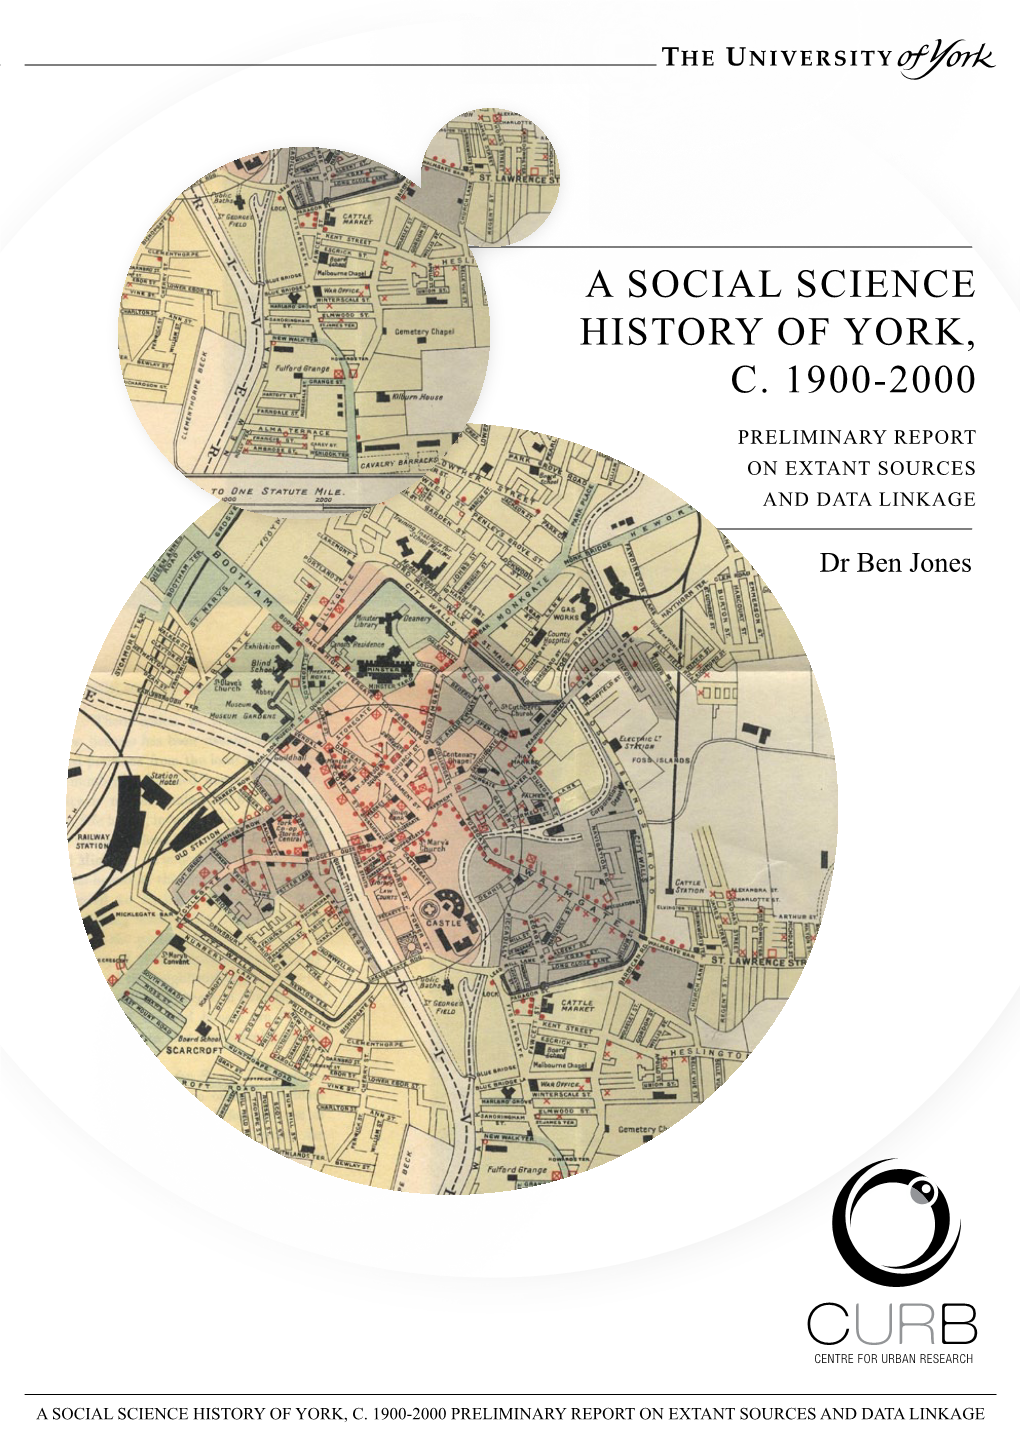 A Social Science History of York, C. 1900-2000